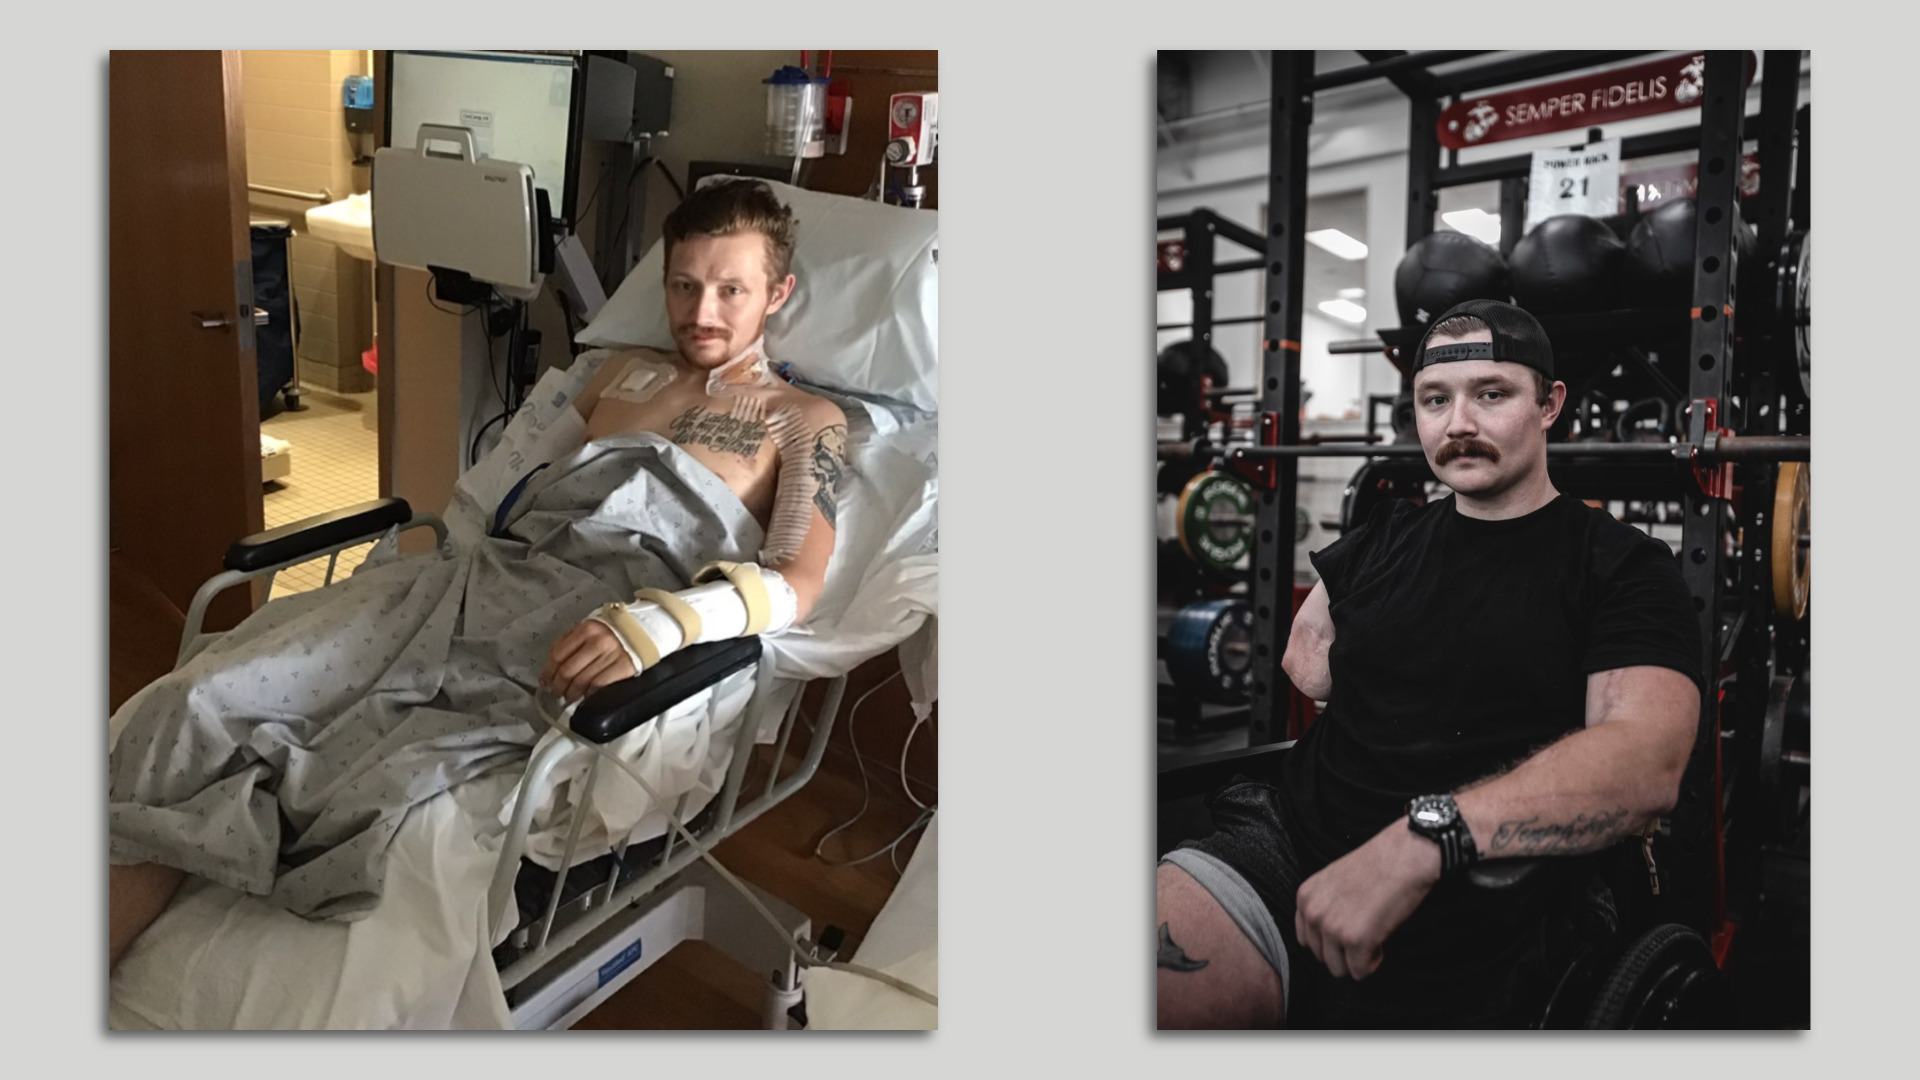 A before and after of Andrews, in a hospital bed after being wounded at war (left) and recovered in a gym wearing a black t-shirt and hat. 